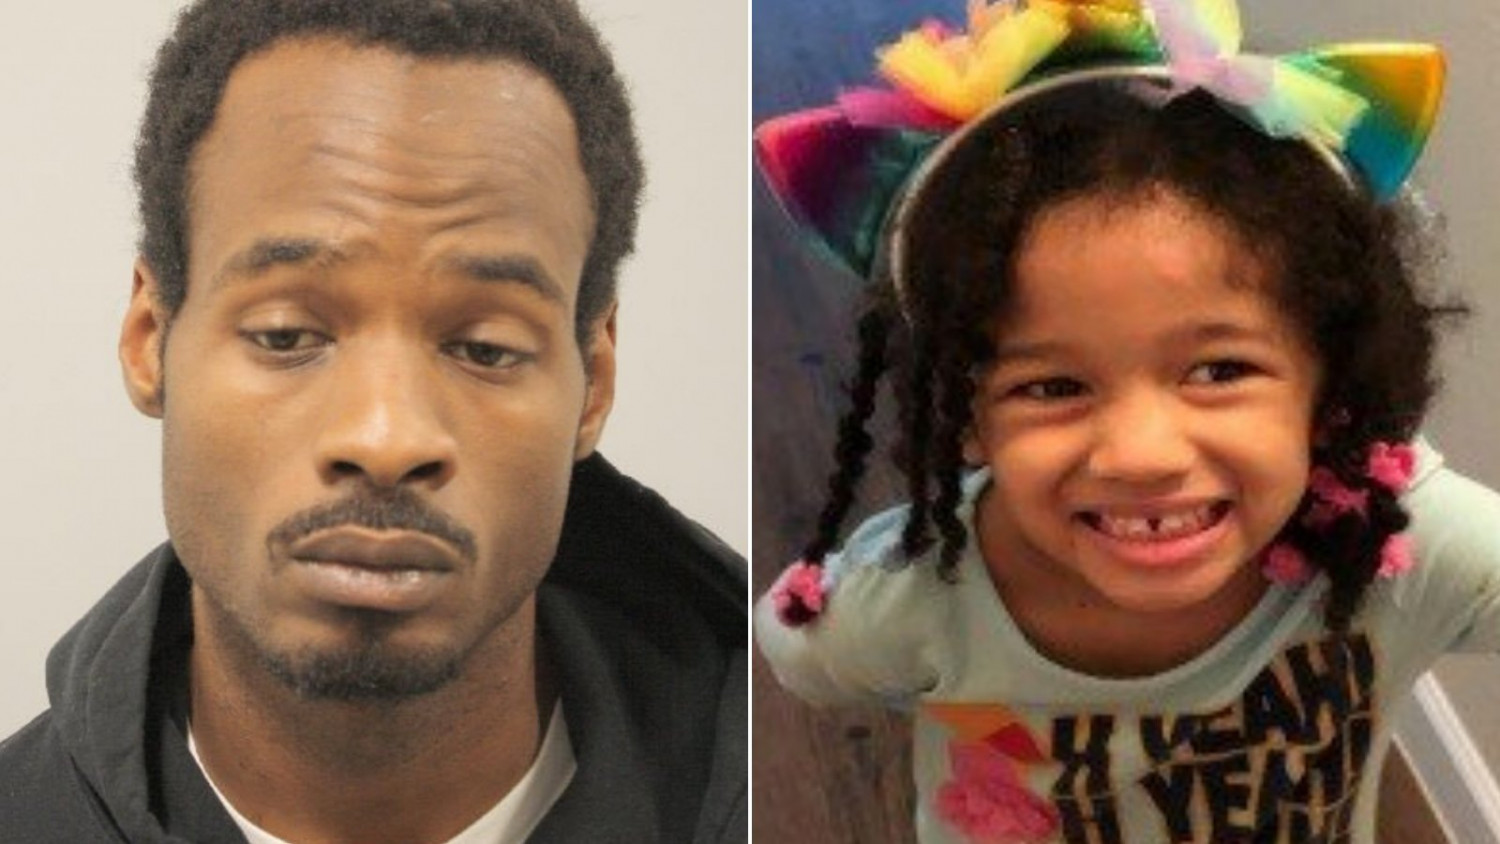 Body of Child Found During Search for Maleah Davis in Arkansas